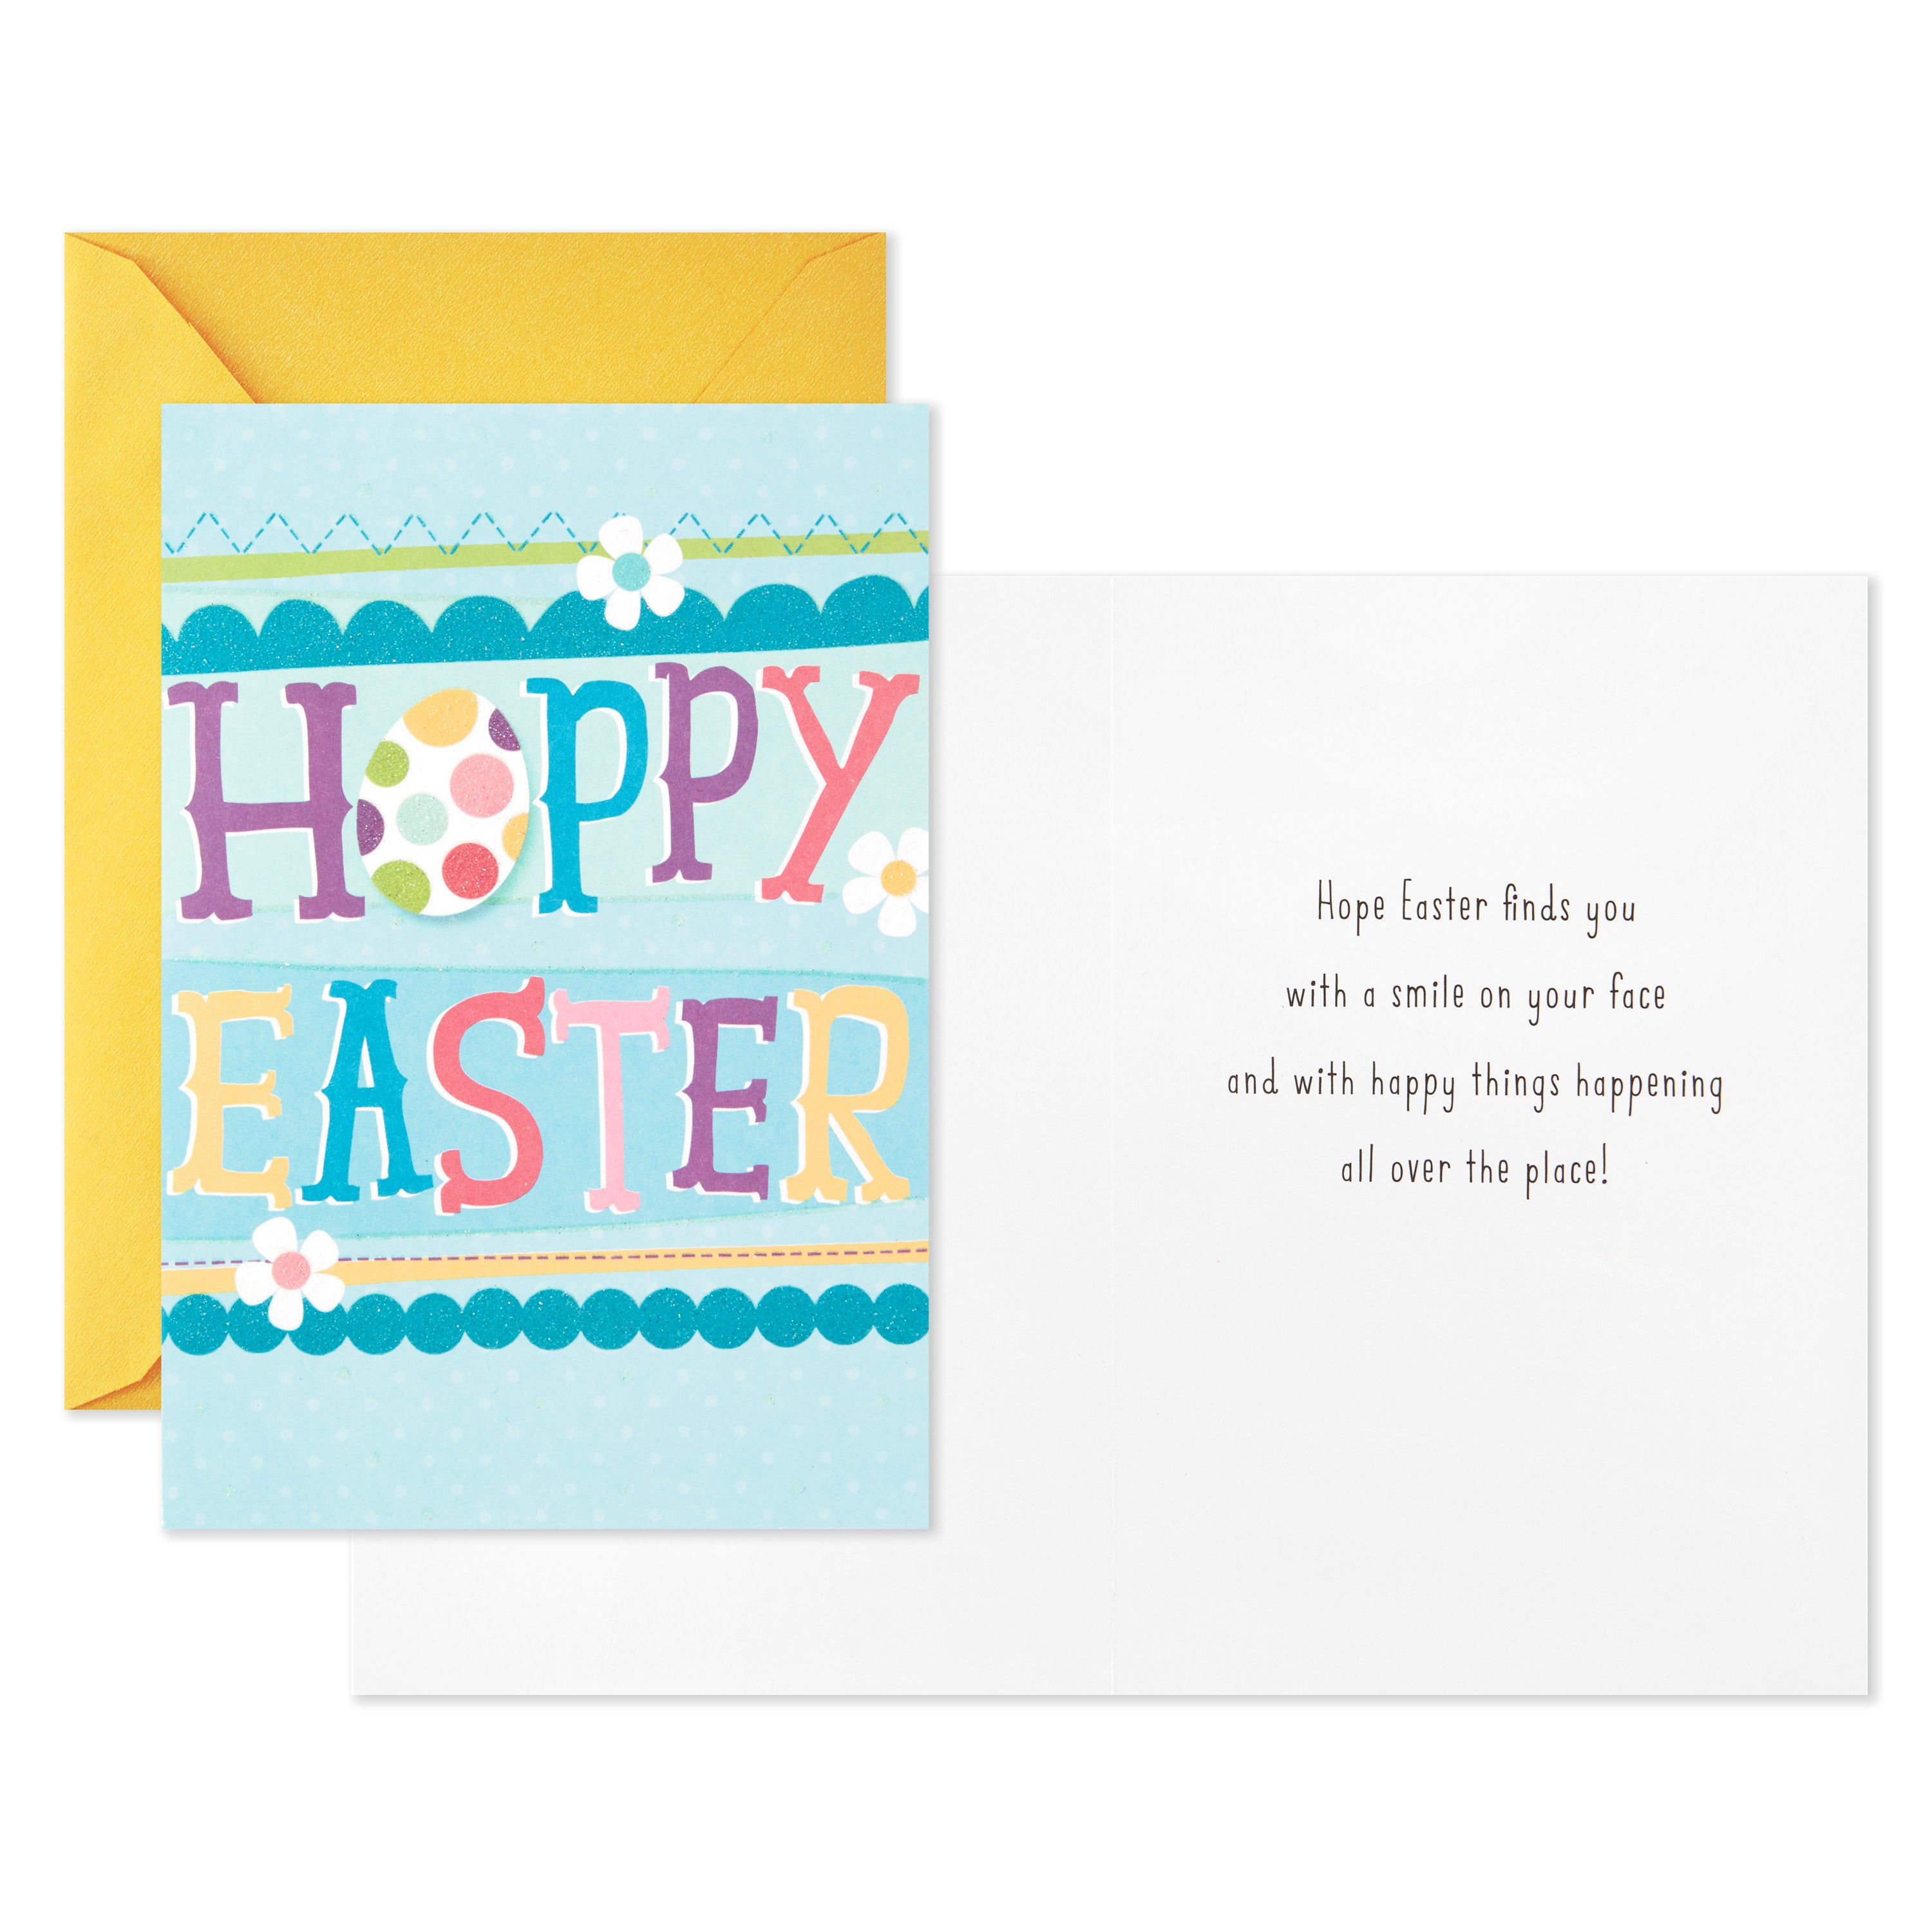 Pack of Easter Cards, Hoppy Easter (10 Cards with Envelopes)